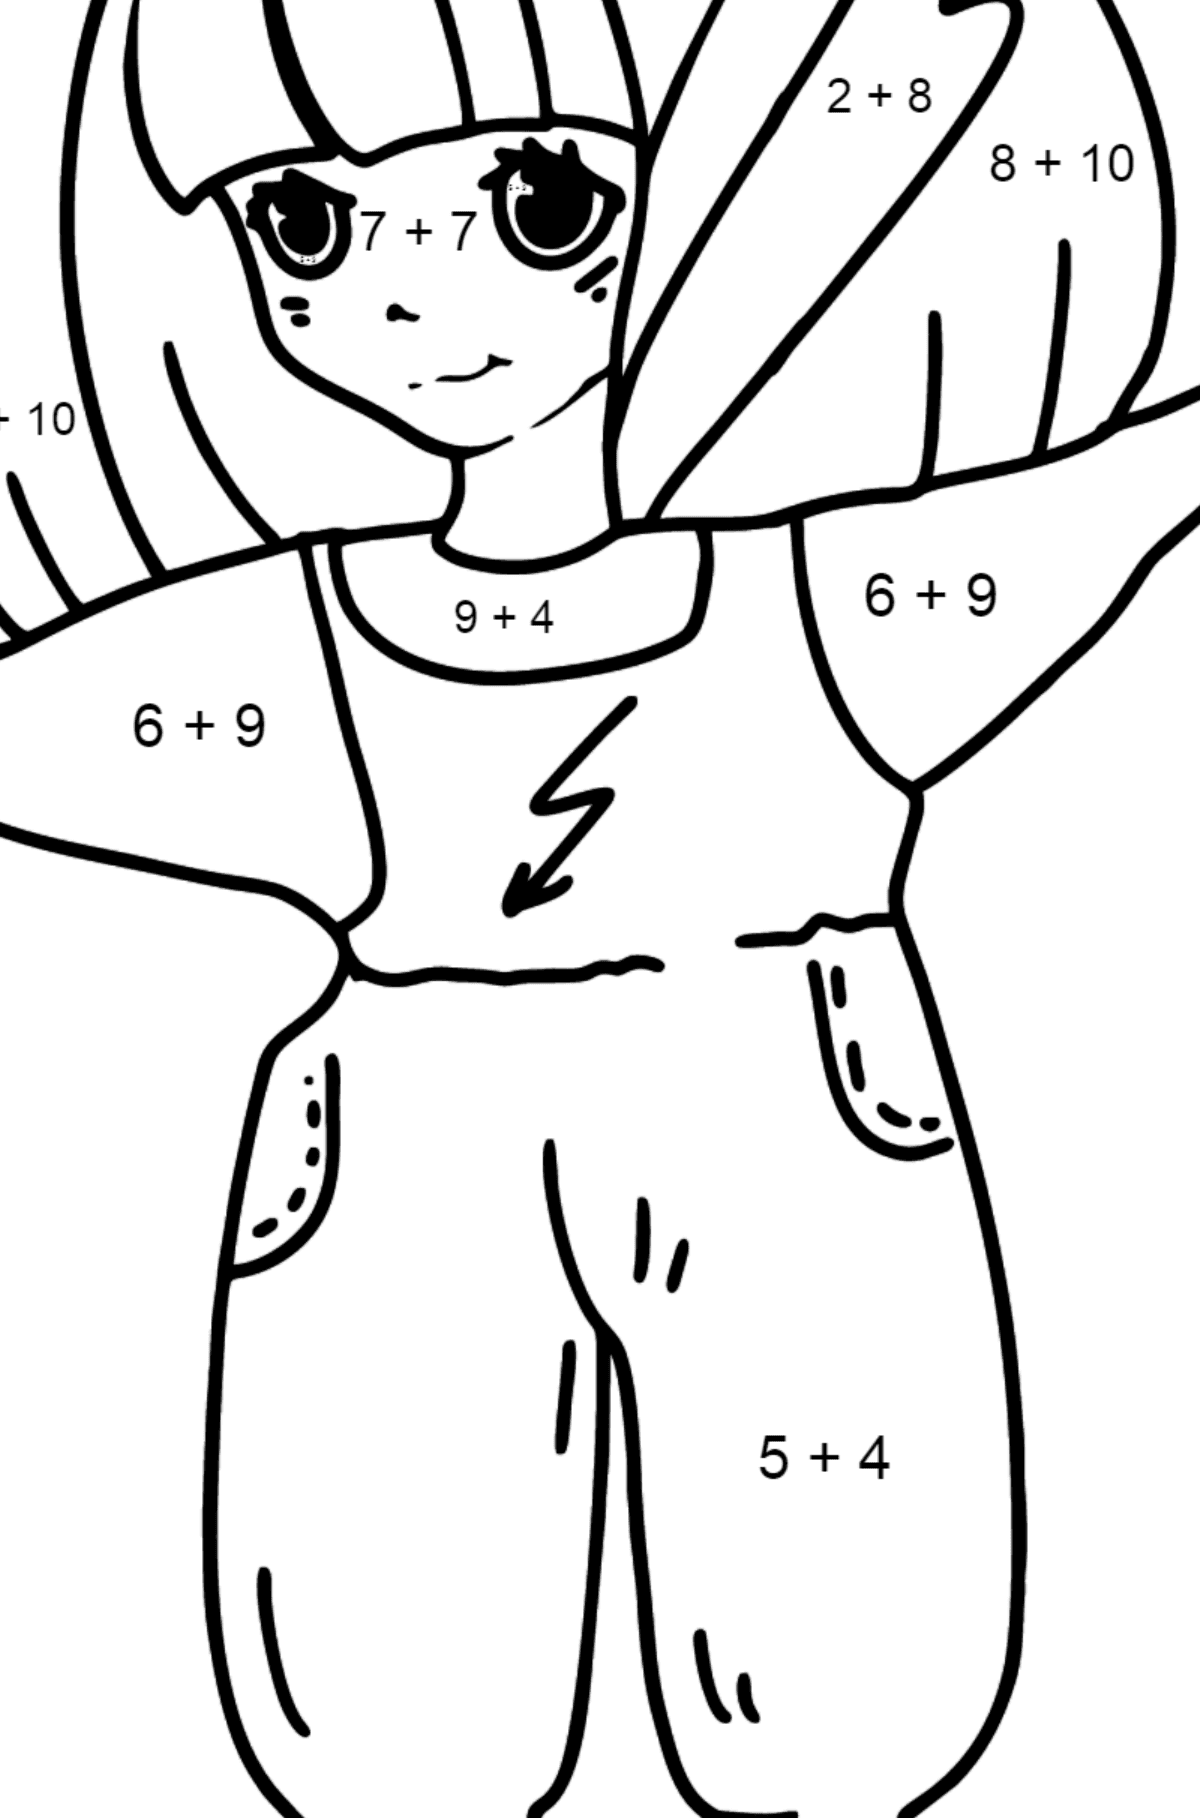 Thunder Anime Girl Coloring Pages - Math Coloring - Addition for Kids